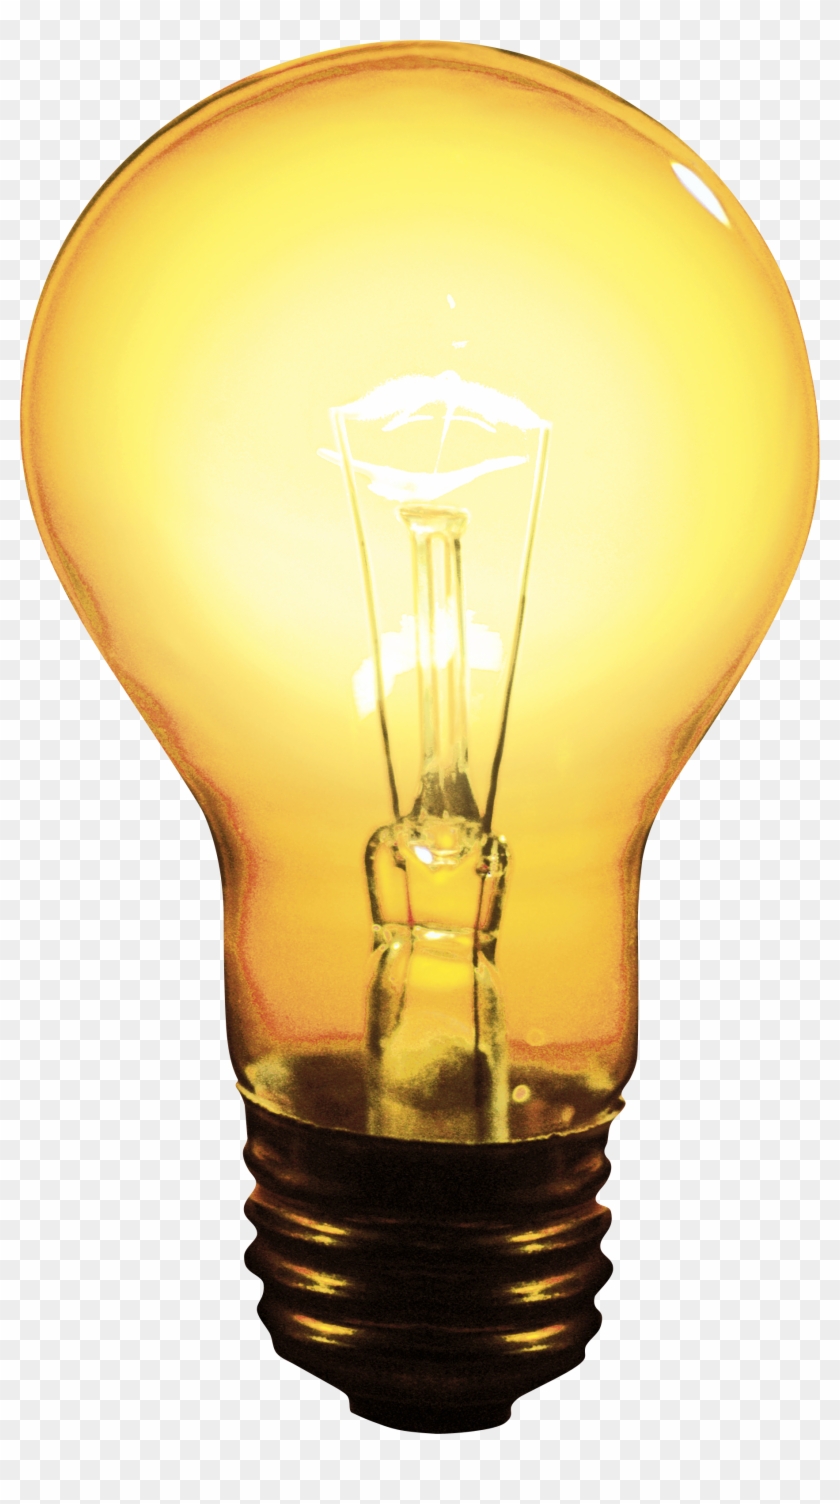 Electricity Clipart Lamp - Lamp Png #593236